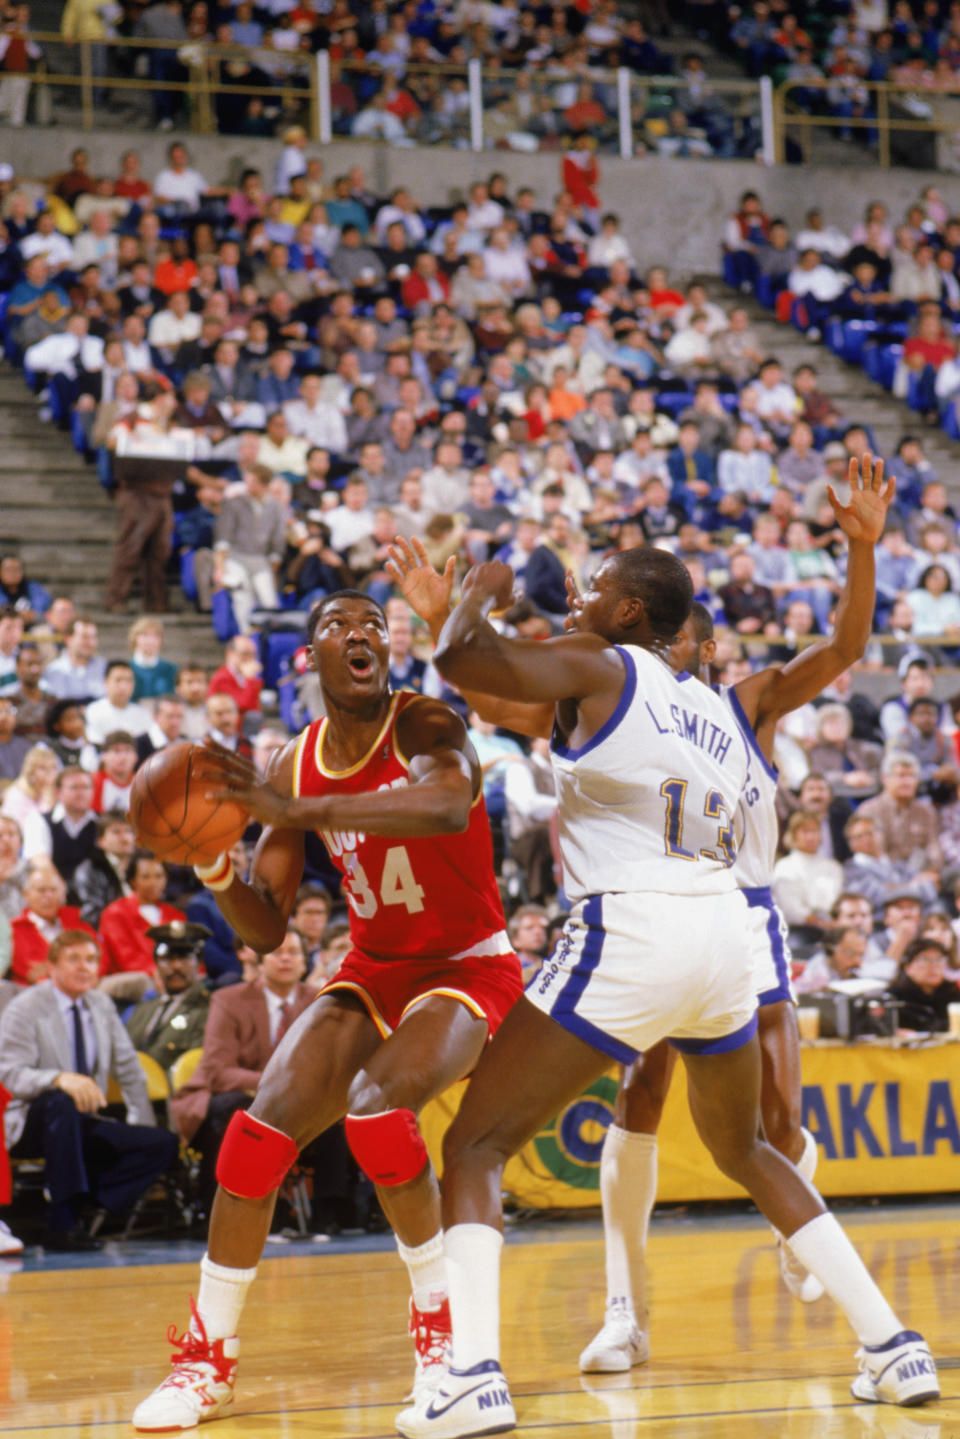 1987: Akeem Olajuwon #34 of the <a class="link " href="https://sports.yahoo.com/nba/teams/houston/" data-i13n="sec:content-canvas;subsec:anchor_text;elm:context_link" data-ylk="slk:Houston Rocket;sec:content-canvas;subsec:anchor_text;elm:context_link;itc:0">Houston Rocket</a> takes a shot against Larry Smith #13 of the Golden State Warriors during a game in the 1987-88 season. NOTE TO USER: User expressly acknowledges and agrees that, by downloading and/or using this Photograph, User is consenting to the terms and conditions of the Getty Images License Agreement. (Photo by: Otto Greule Jr/Getty Images)